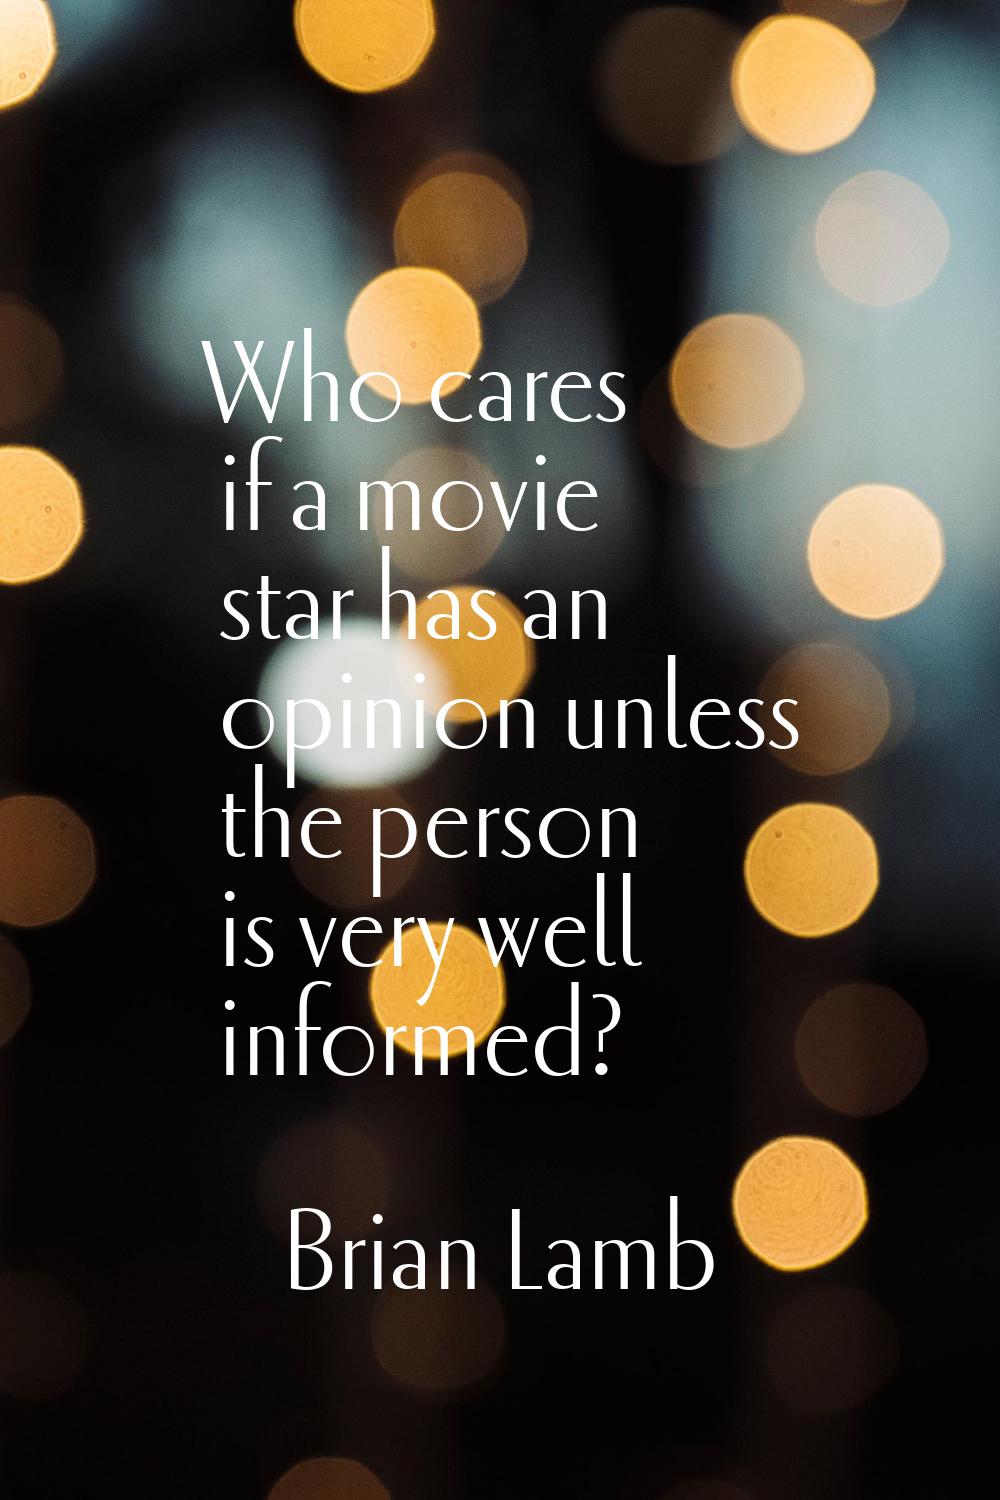 Who cares if a movie star has an opinion unless the person is very well informed?